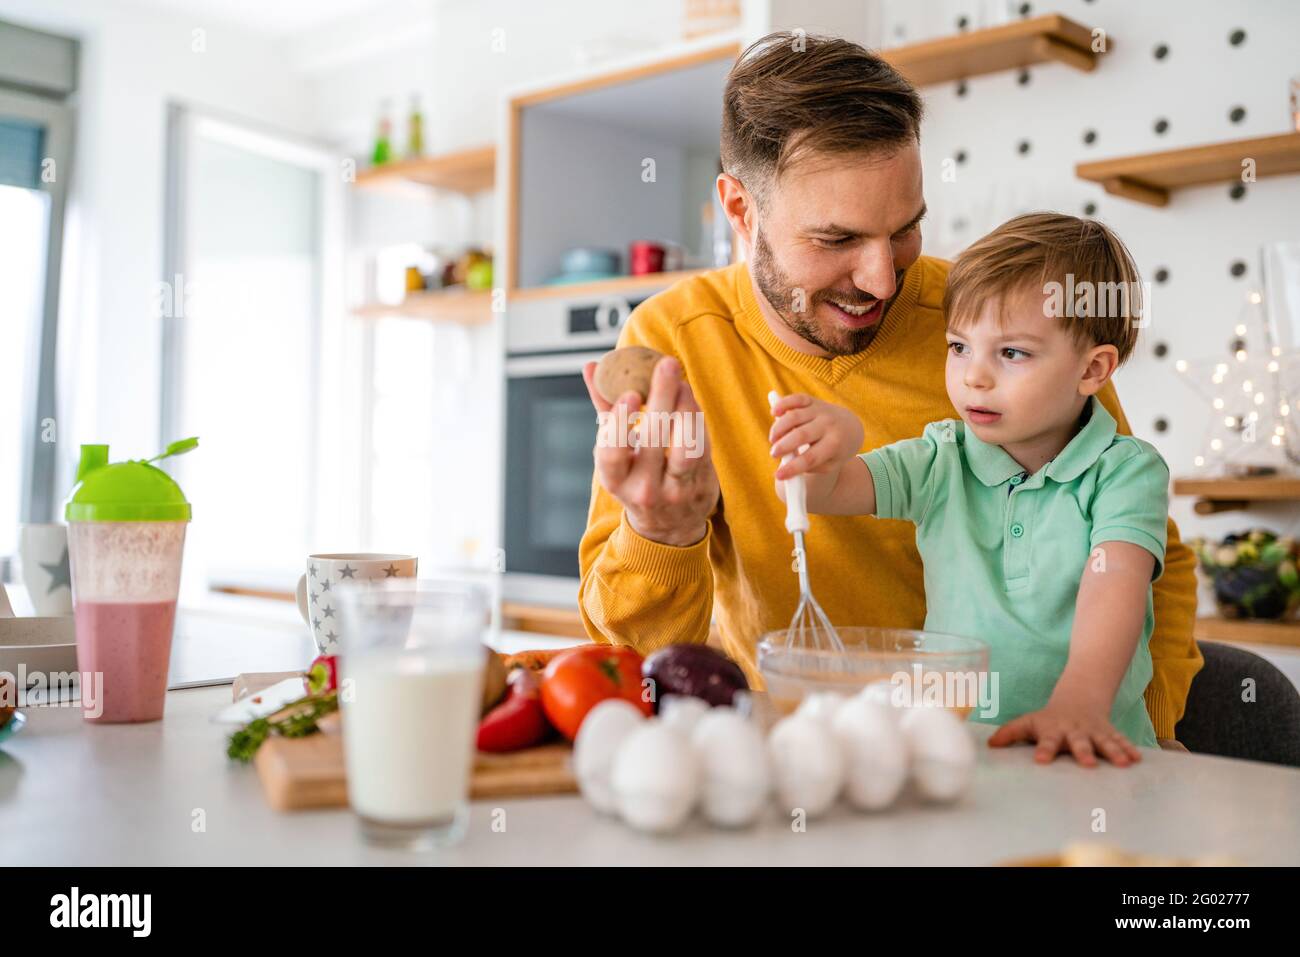 Happy single father with a toddler boy having fun and preparing healthy food in kitchen at home. Stock Photo